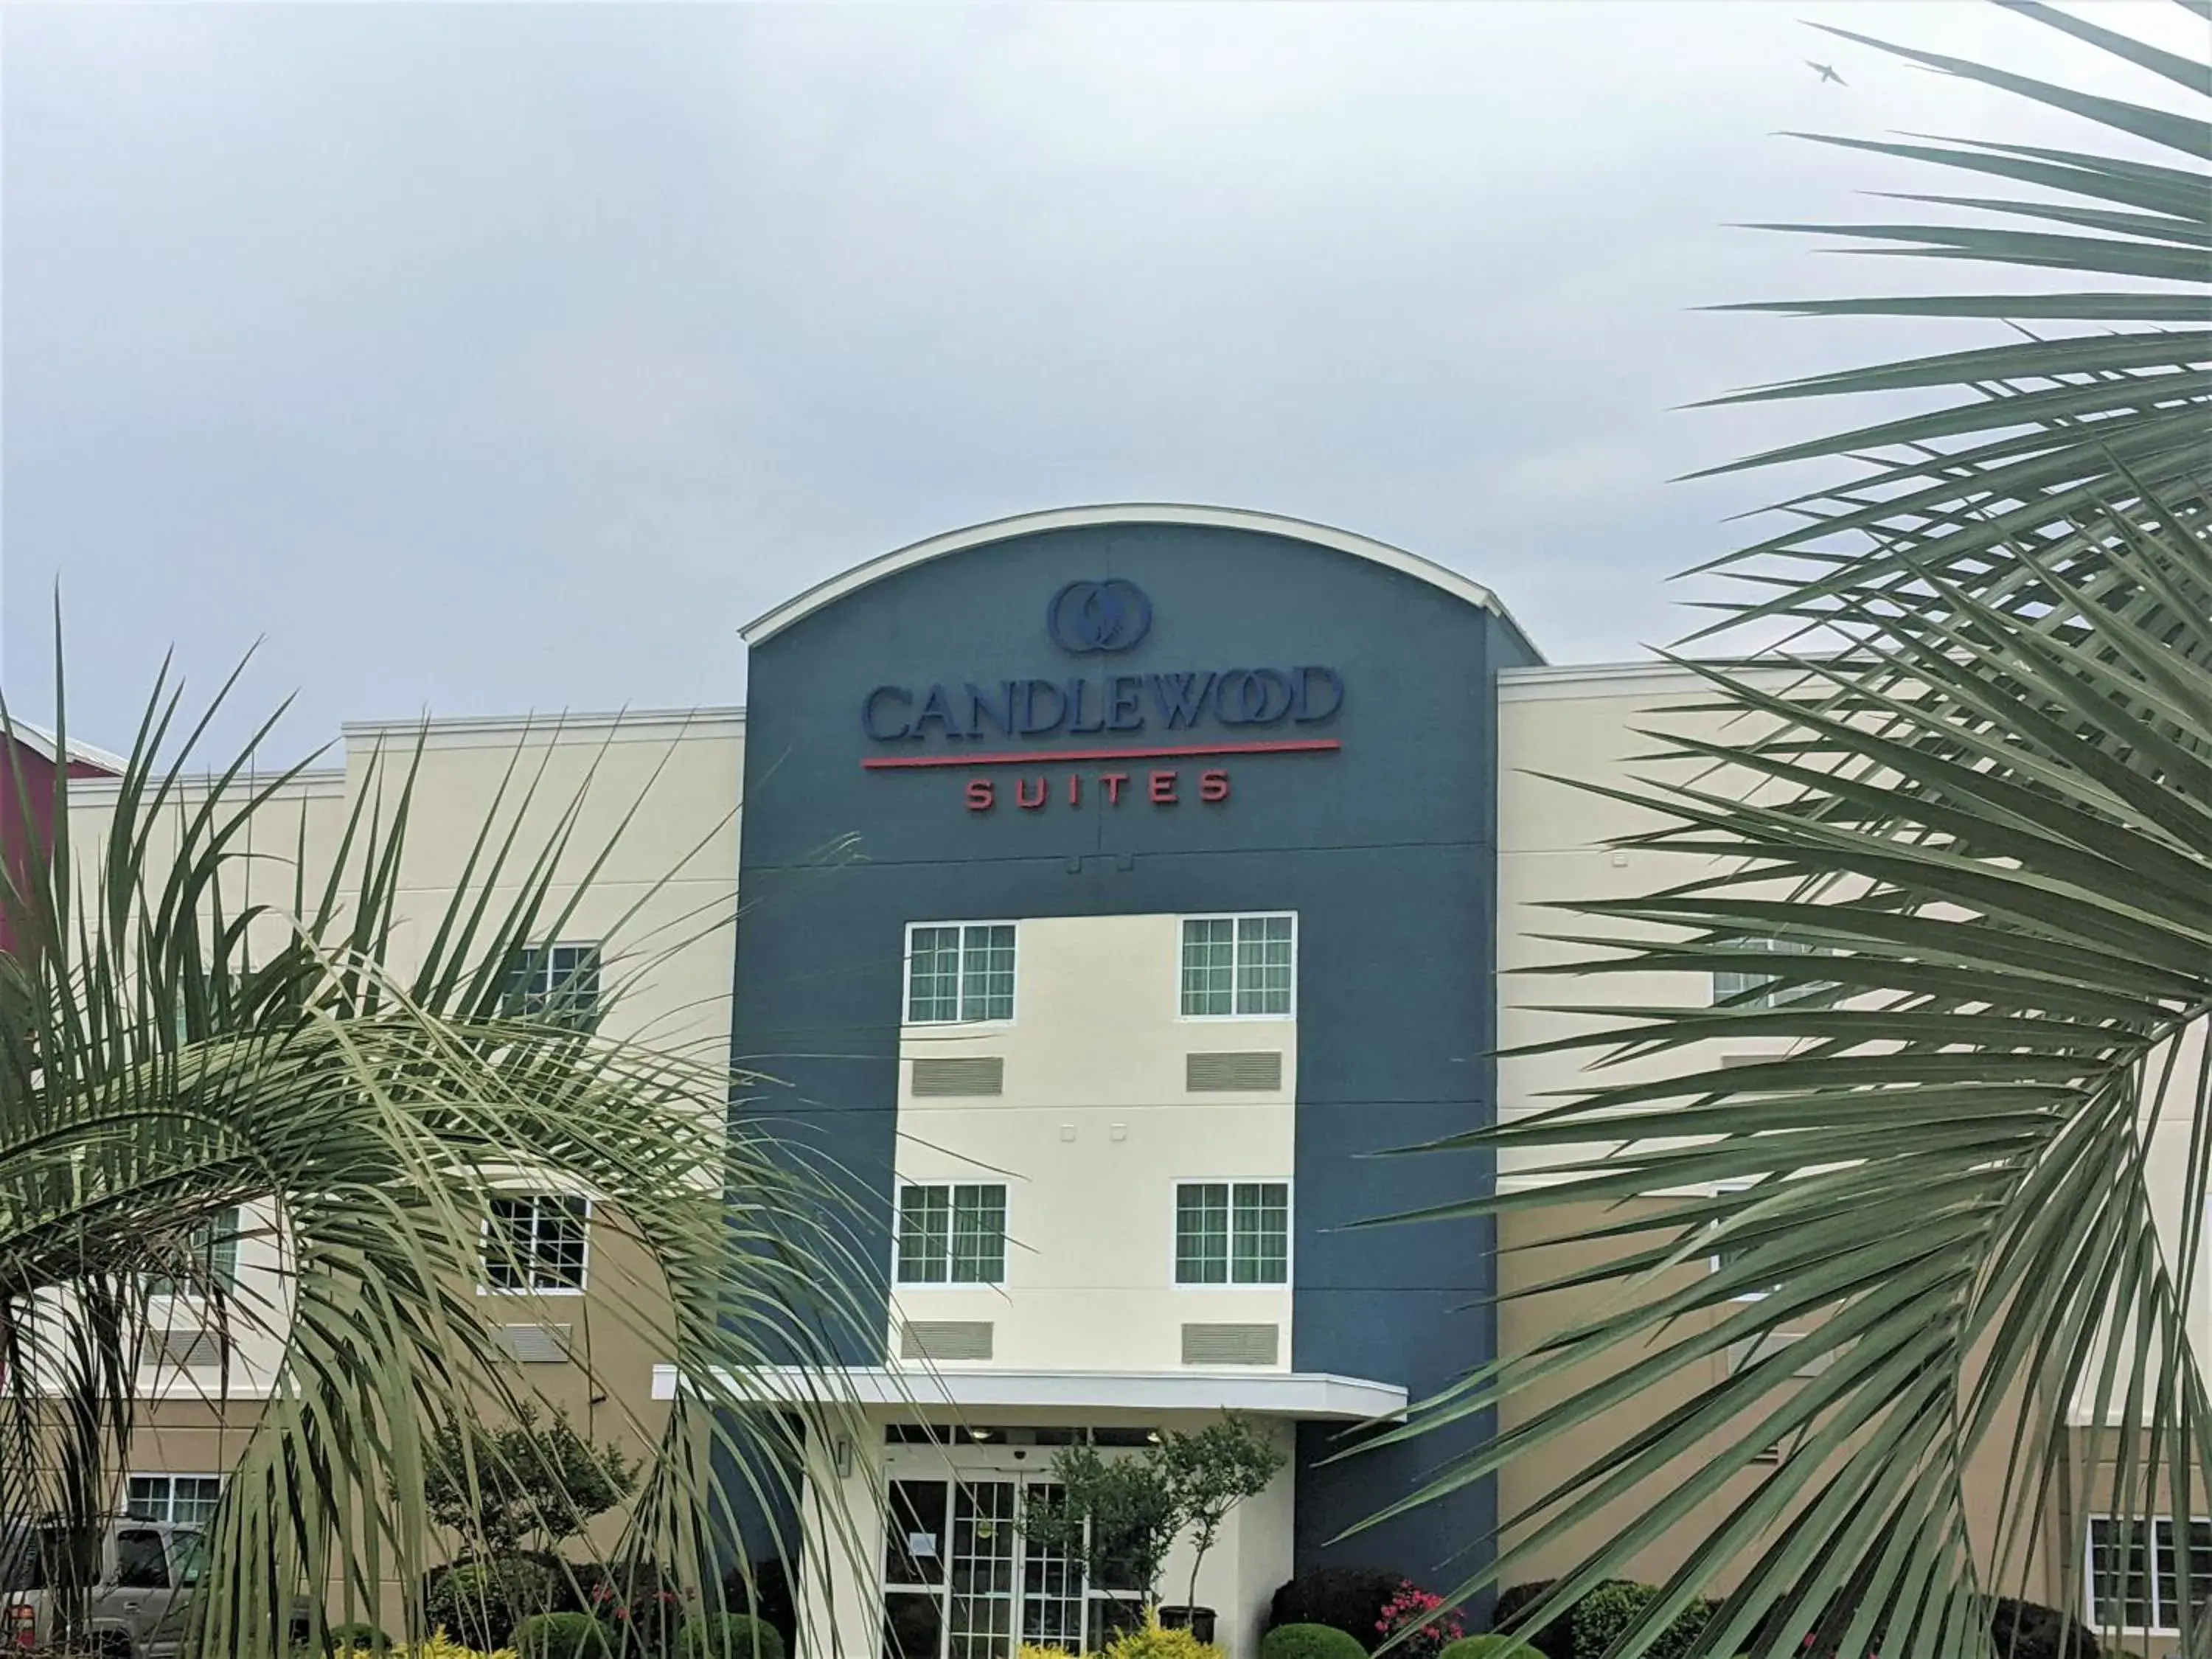 Property Building in Candlewood Suites Macon